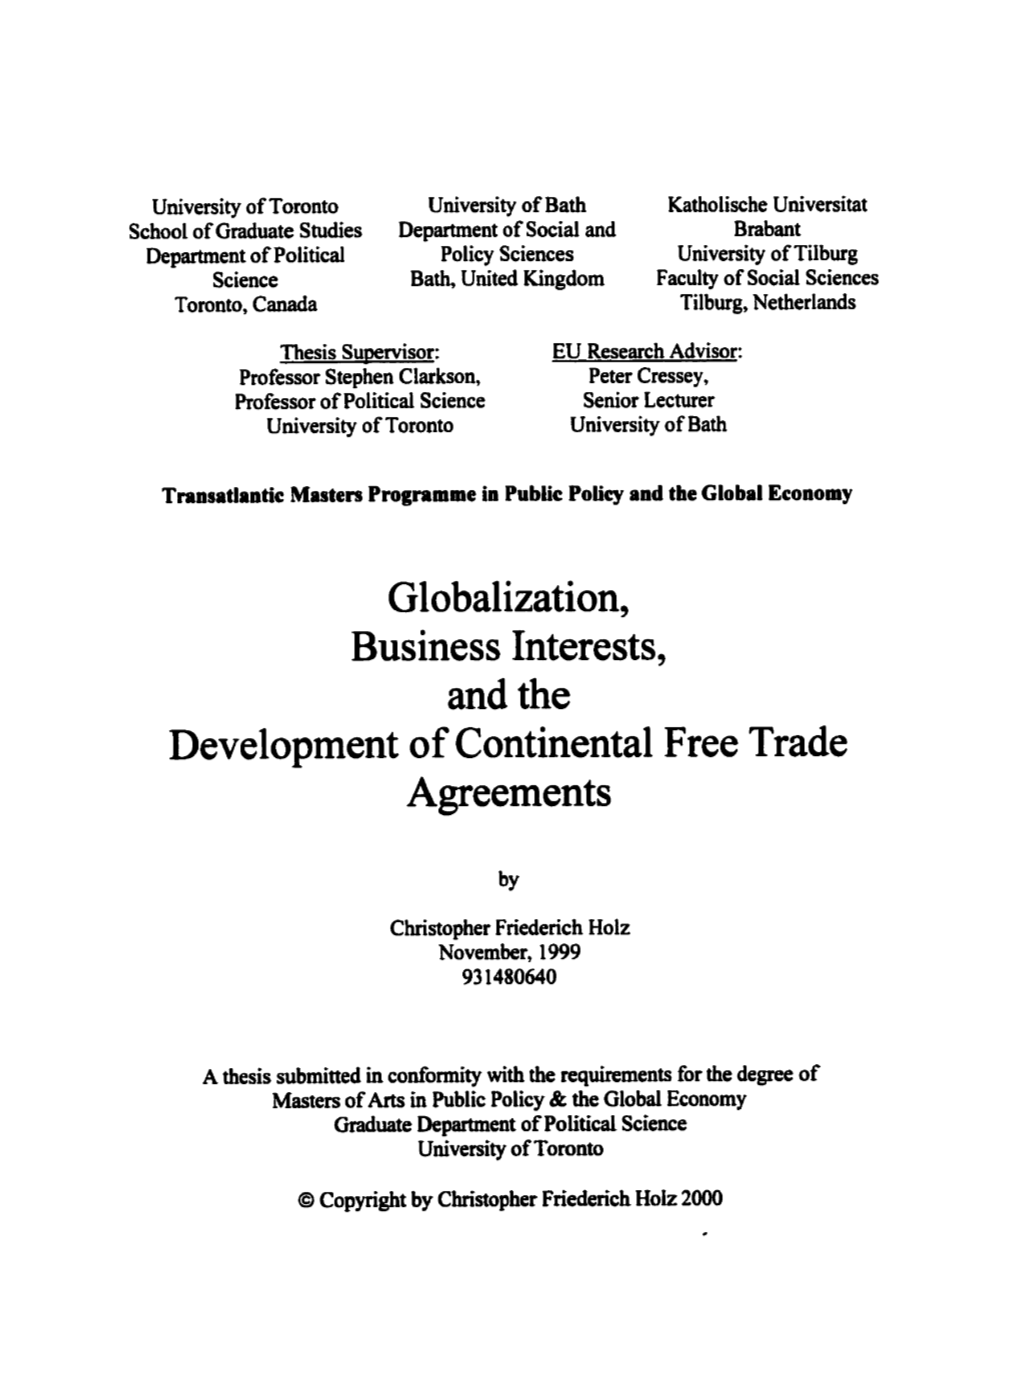 Canadian Big Business: Globalkation and Evolving Preferences for Free Trade A